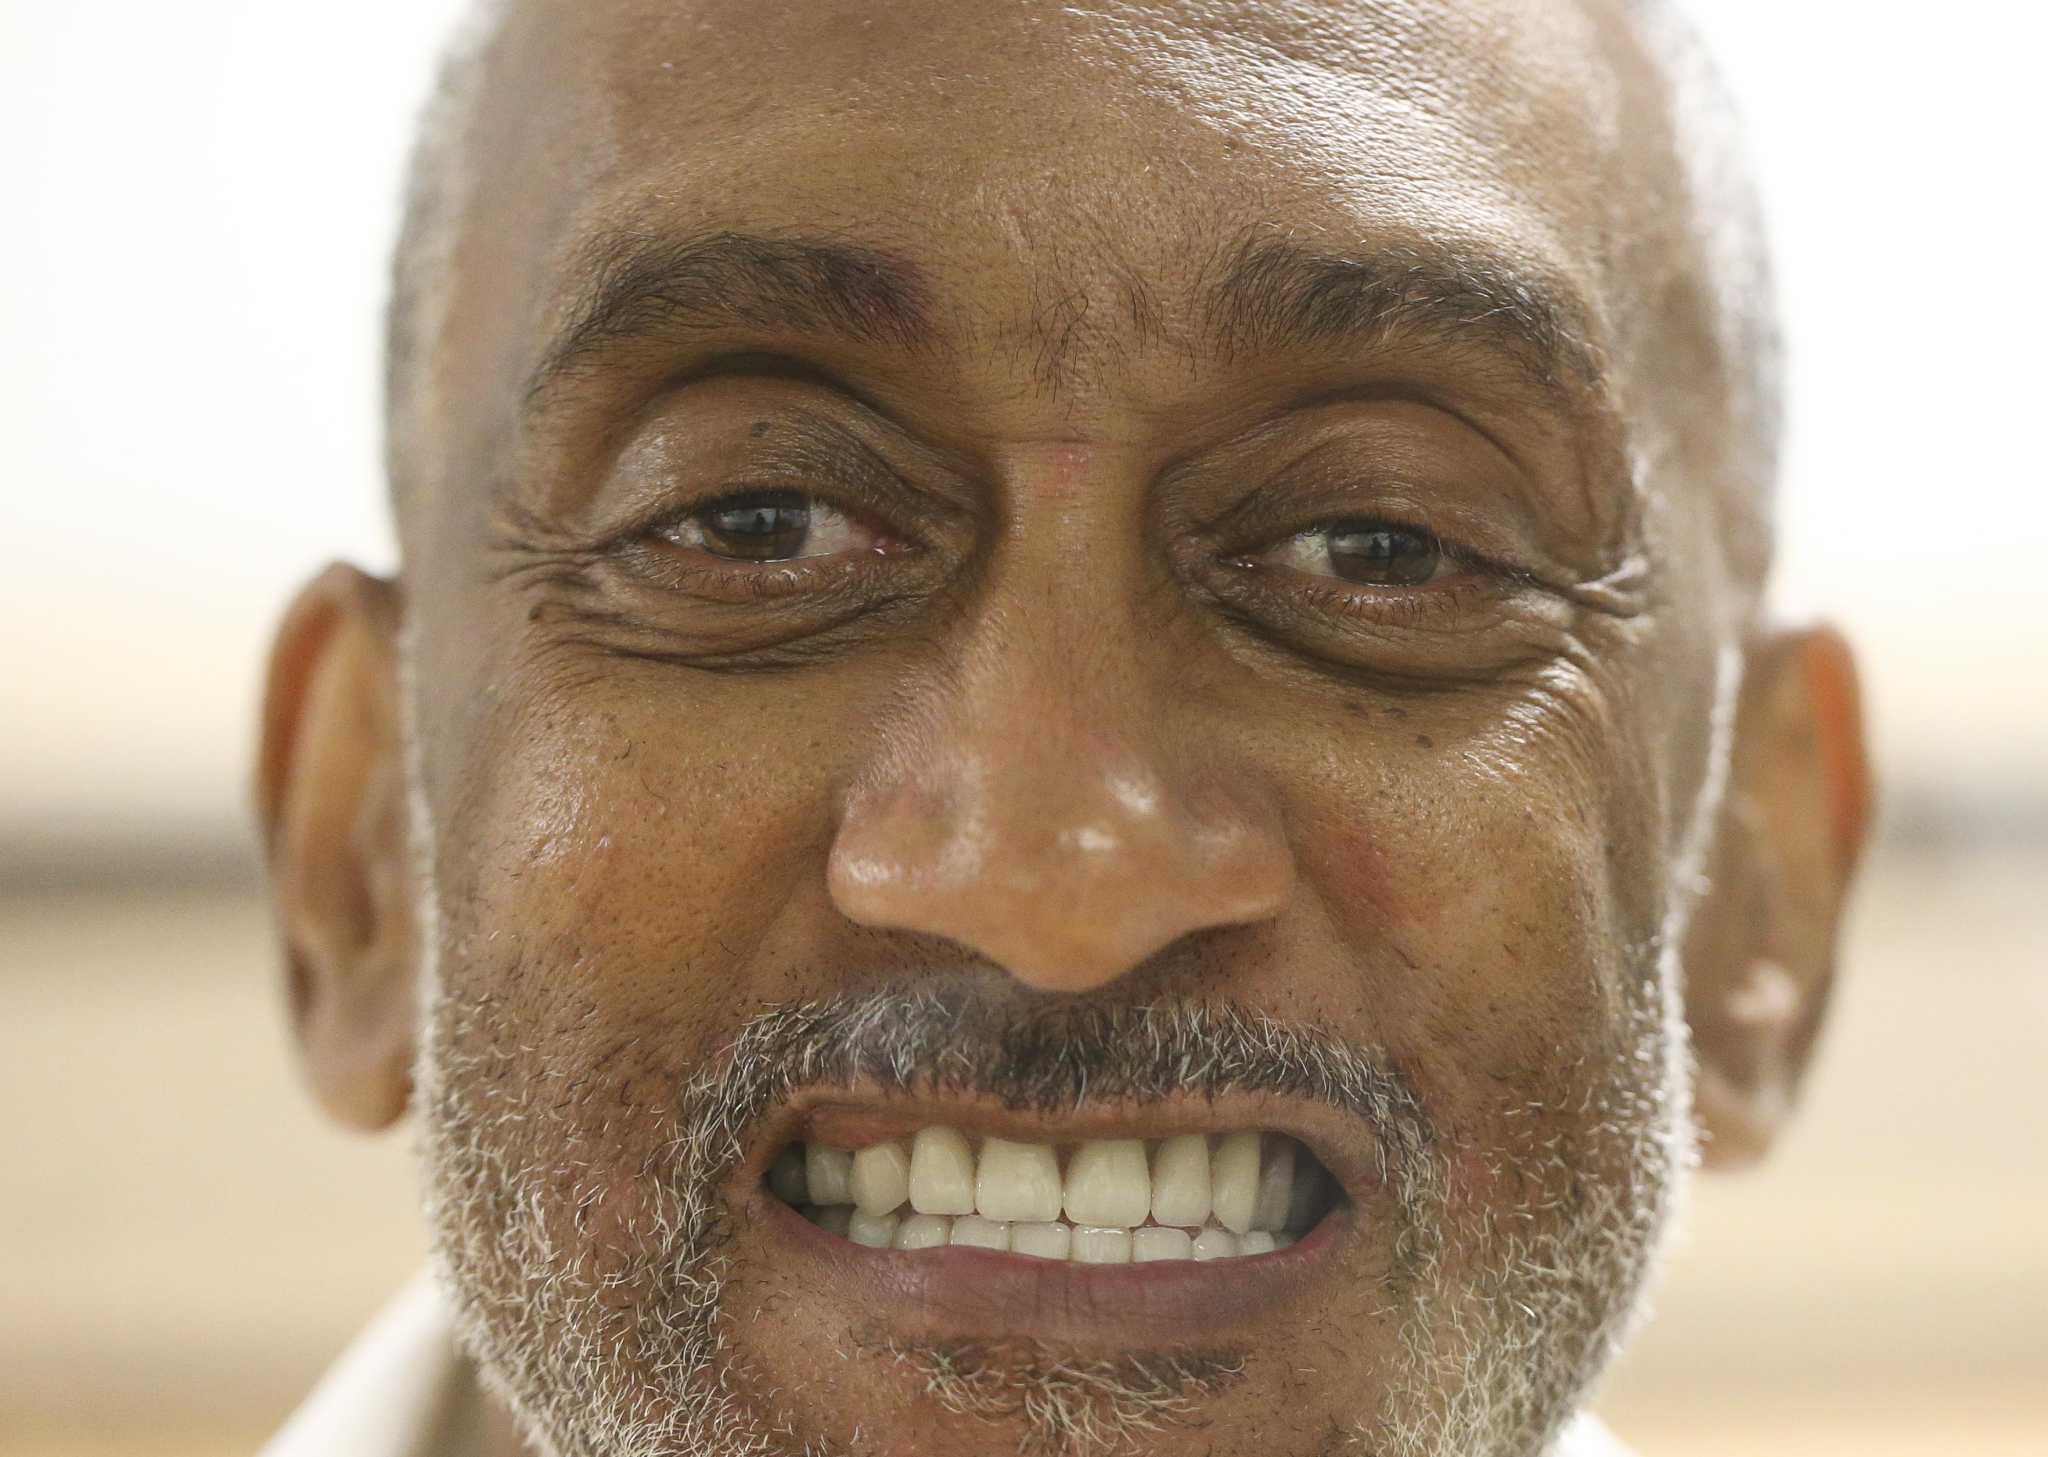 Texas ended its prison dentures program, plans new inmate dental care